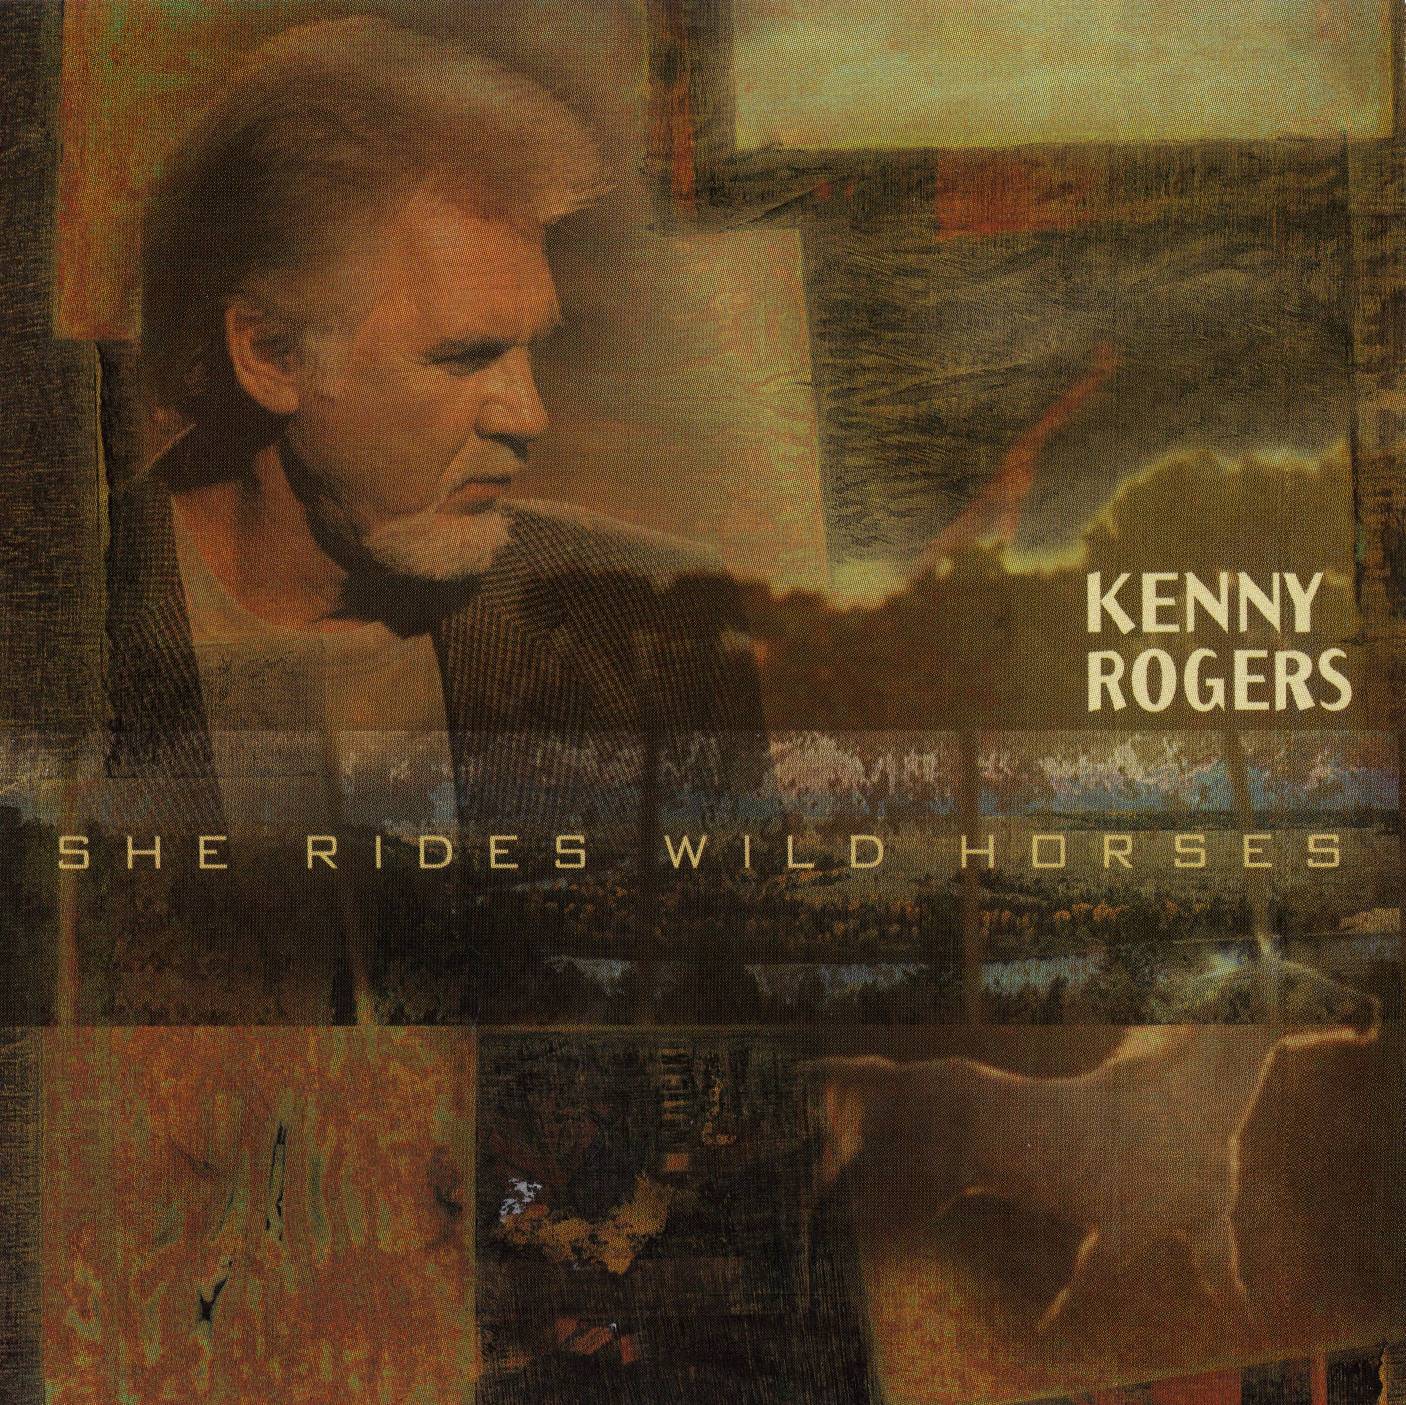 Kenny Rogers - She Rides Wild Horses Album Cover